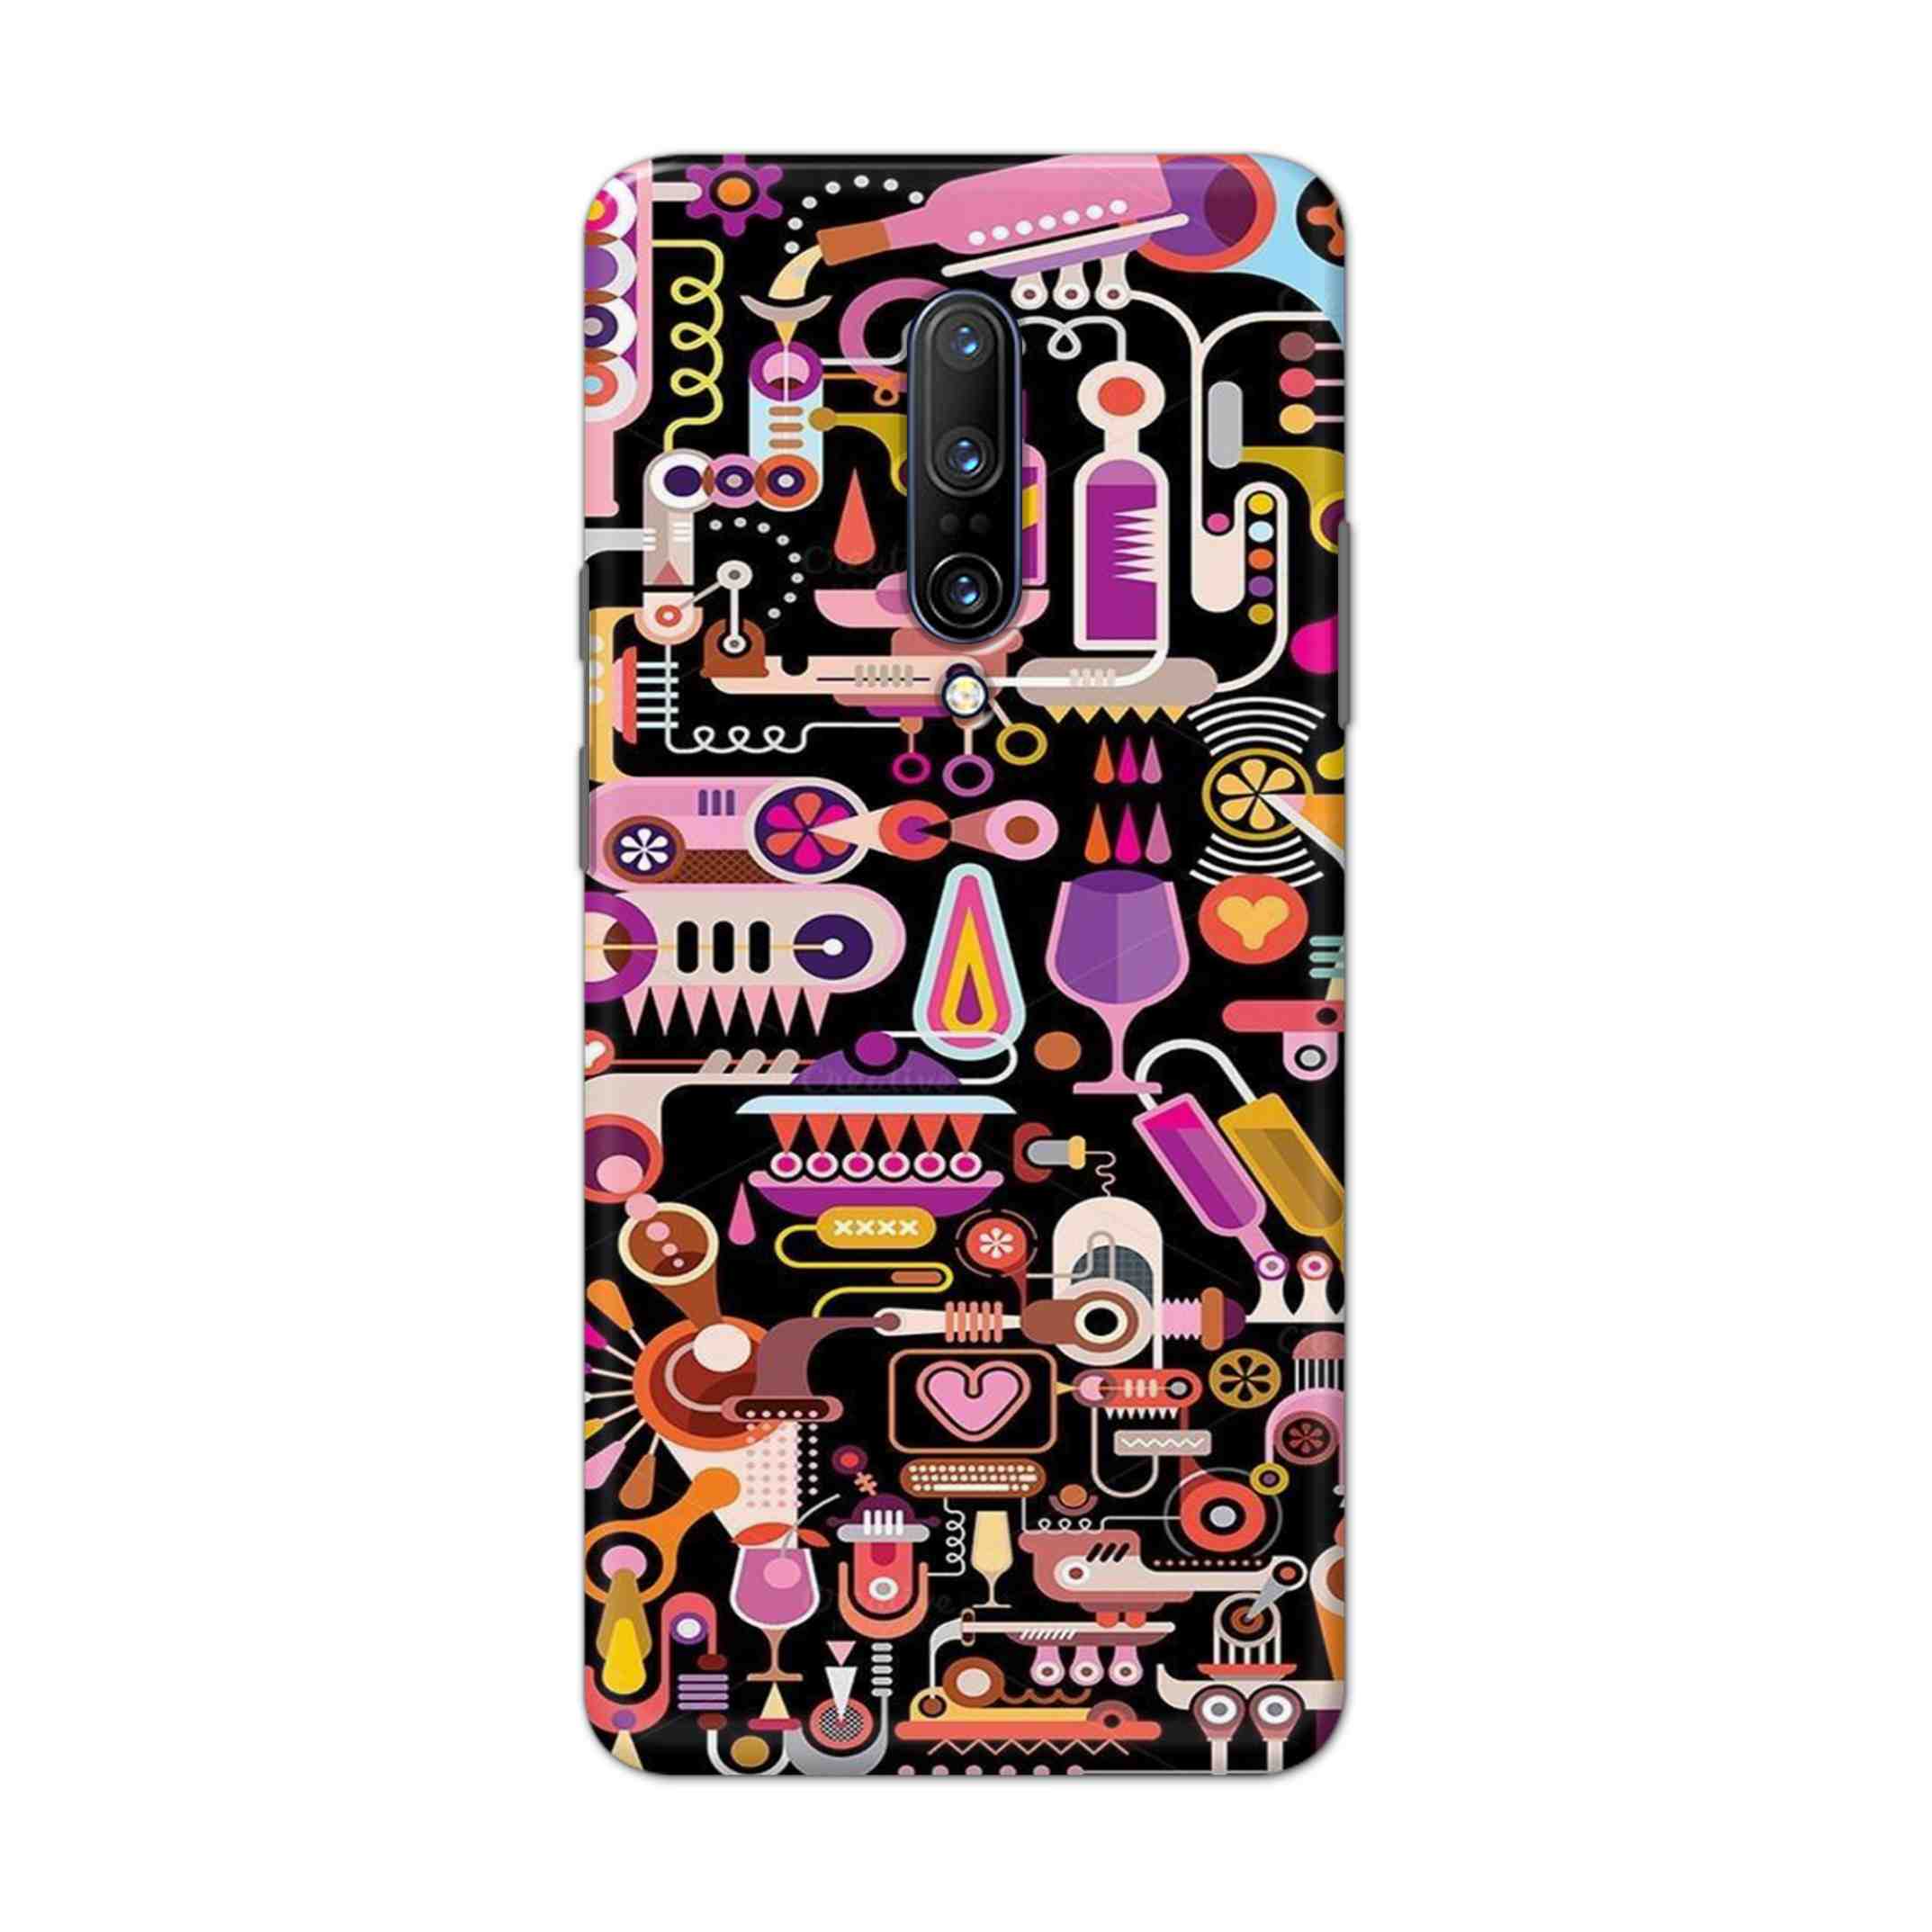 Buy Lab Art Hard Back Mobile Phone Case Cover For OnePlus 7 Pro Online